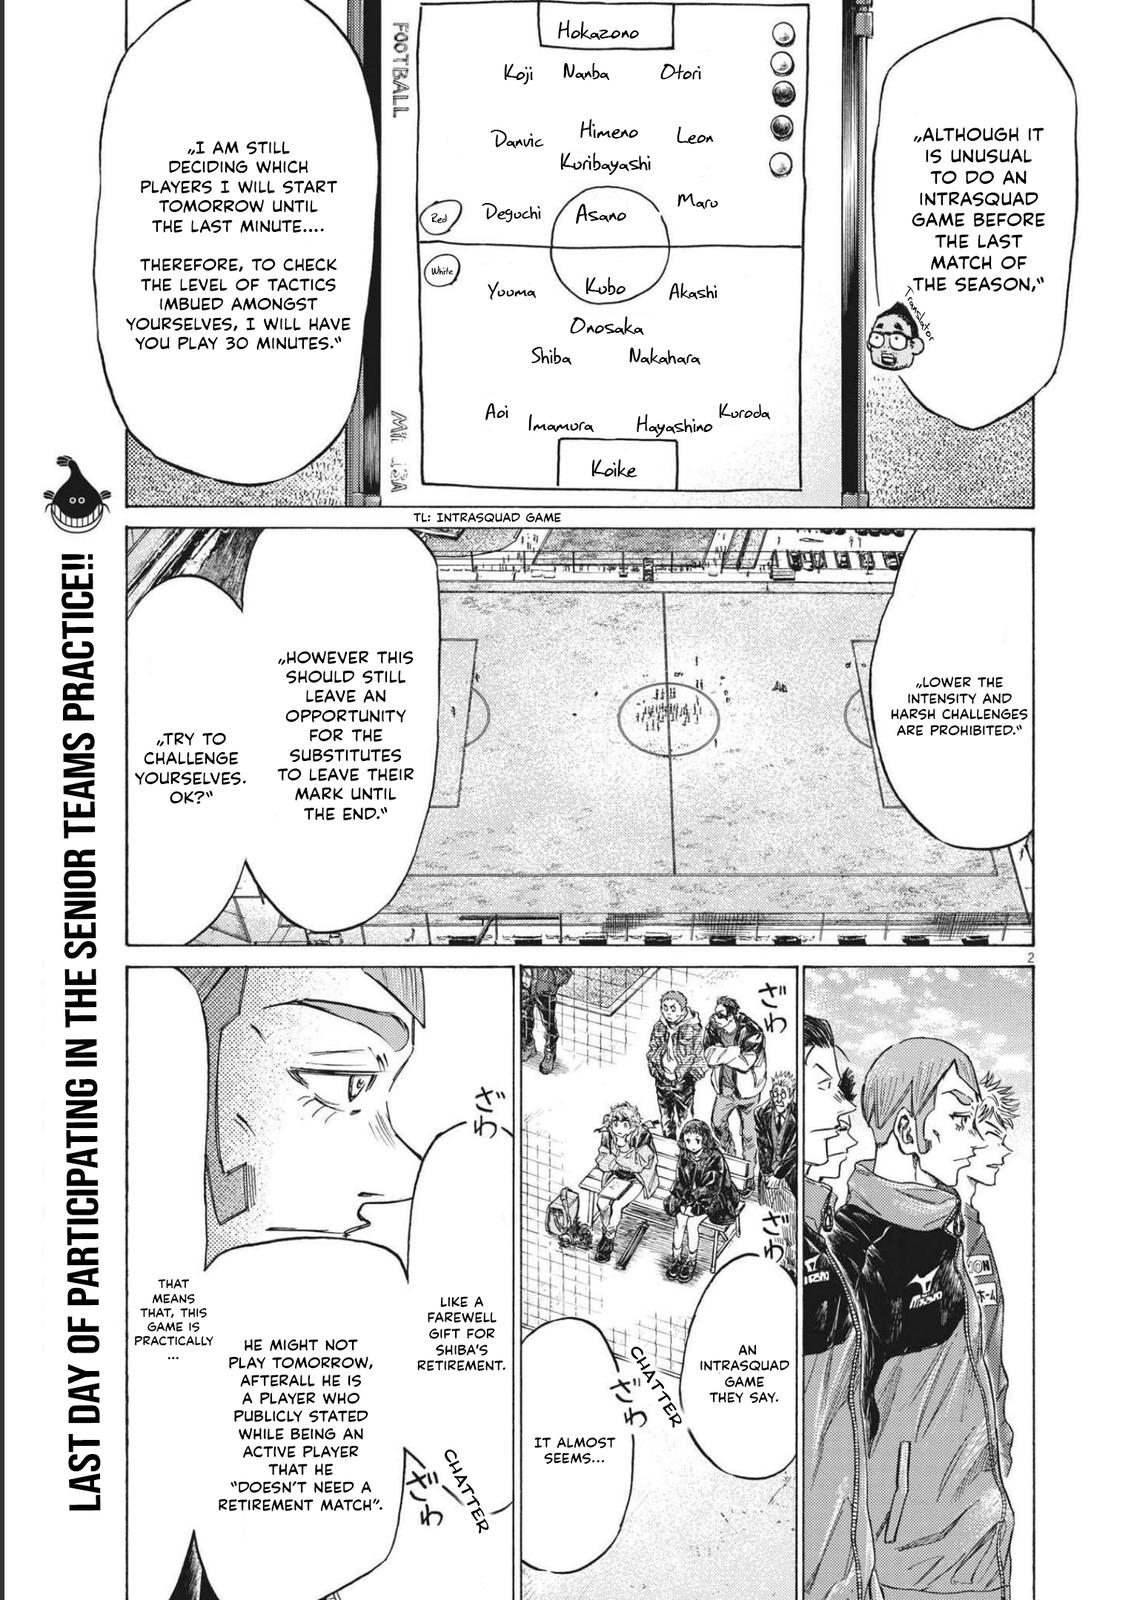 Ao Ashi, Chapter 350  TcbScans Org - Free Manga Online in High Quality